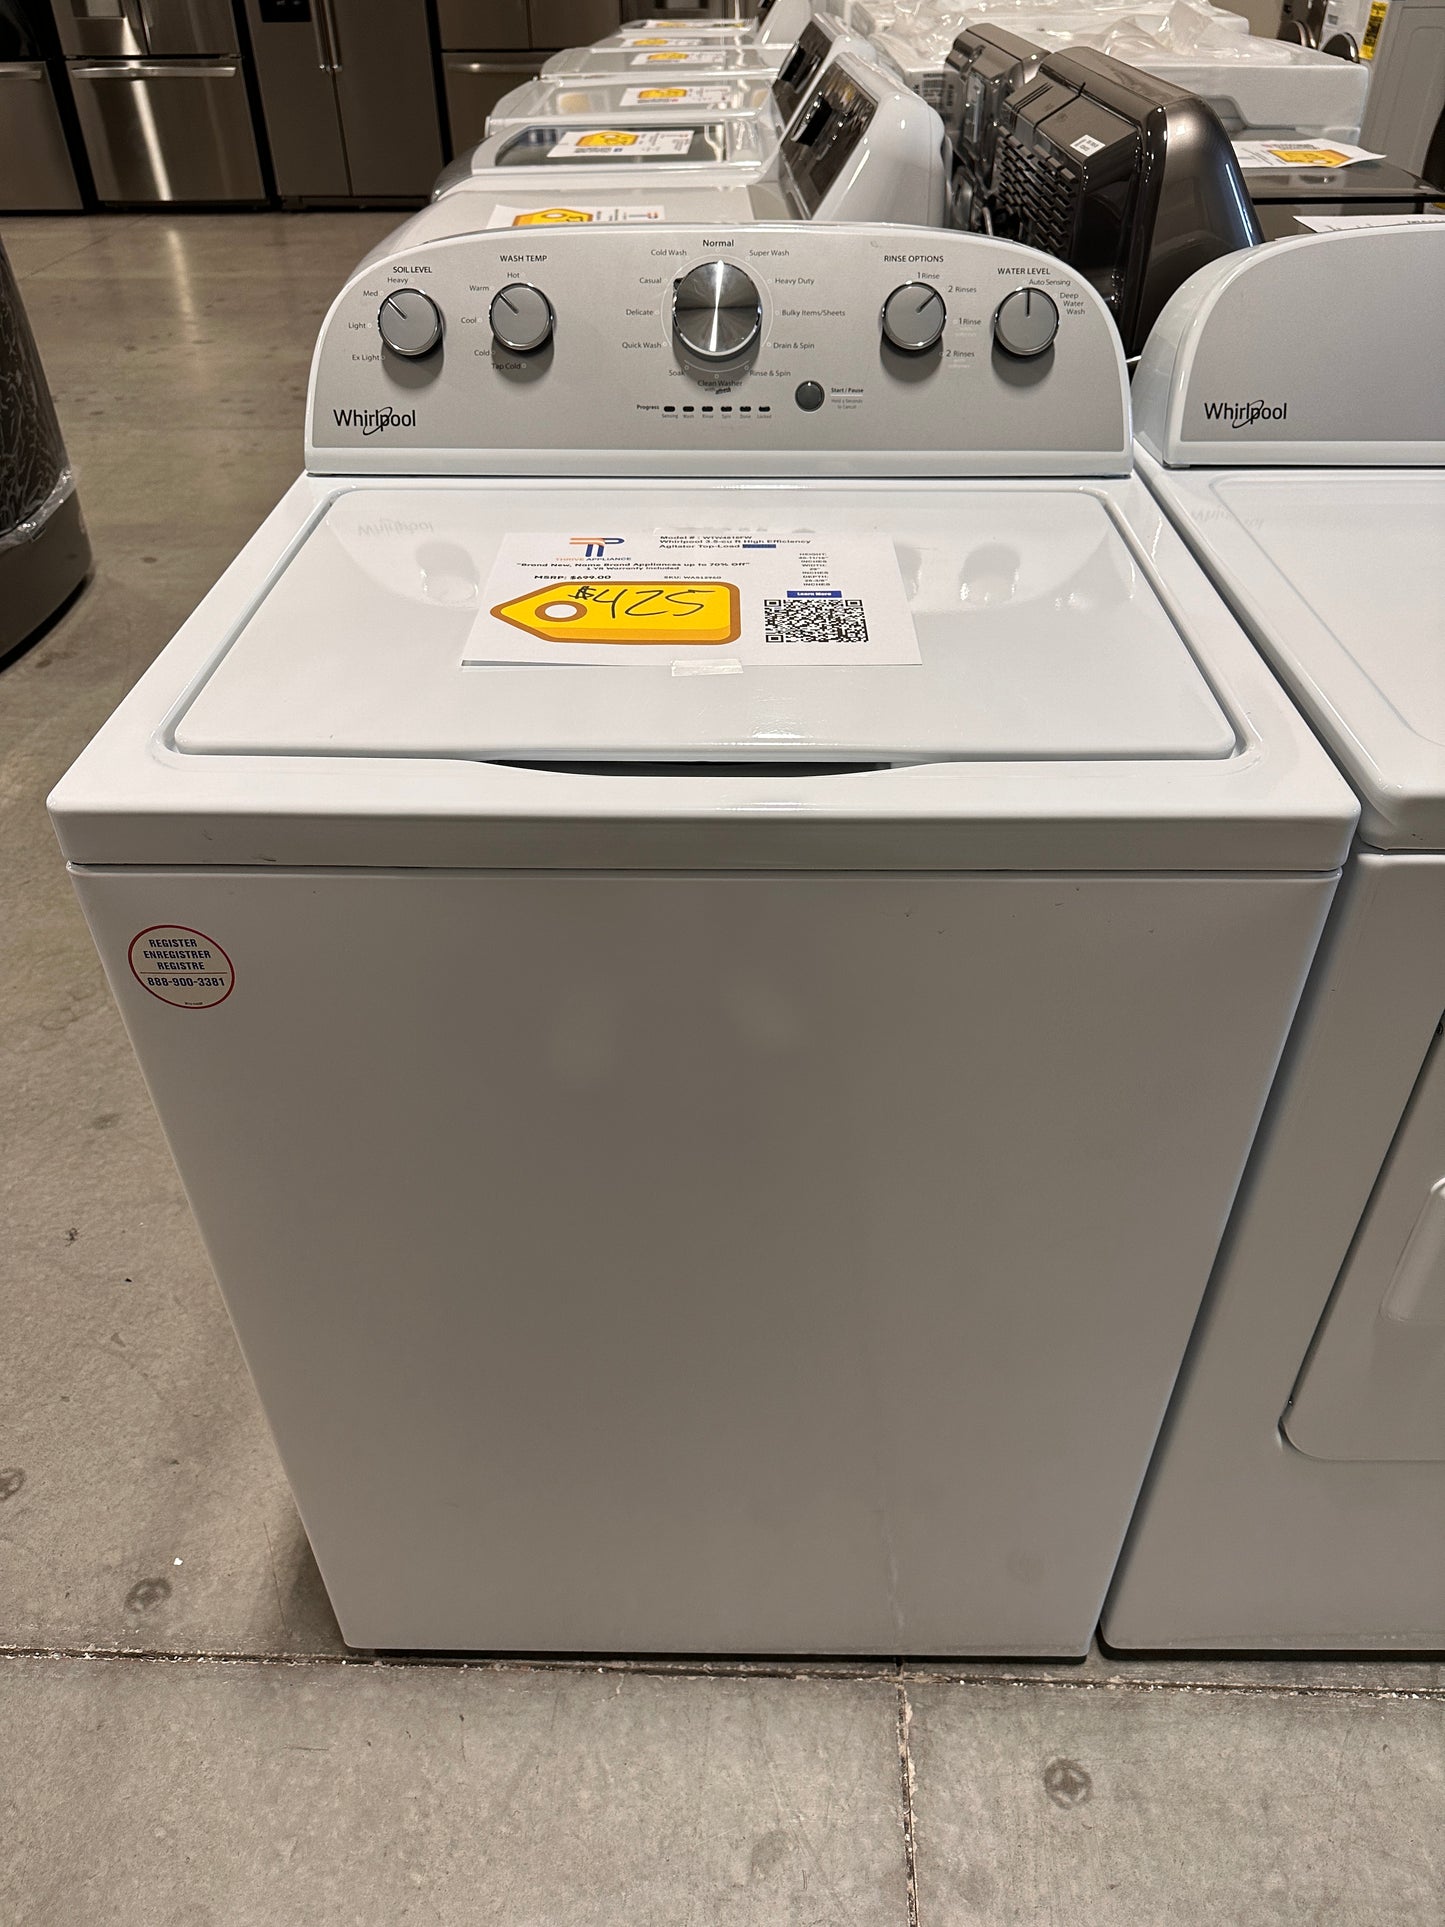 Whirlpool - 3.5 Cu. Ft. 12-Cycle Top-Loading Washer - Model:WTW4816FW  WAS12960